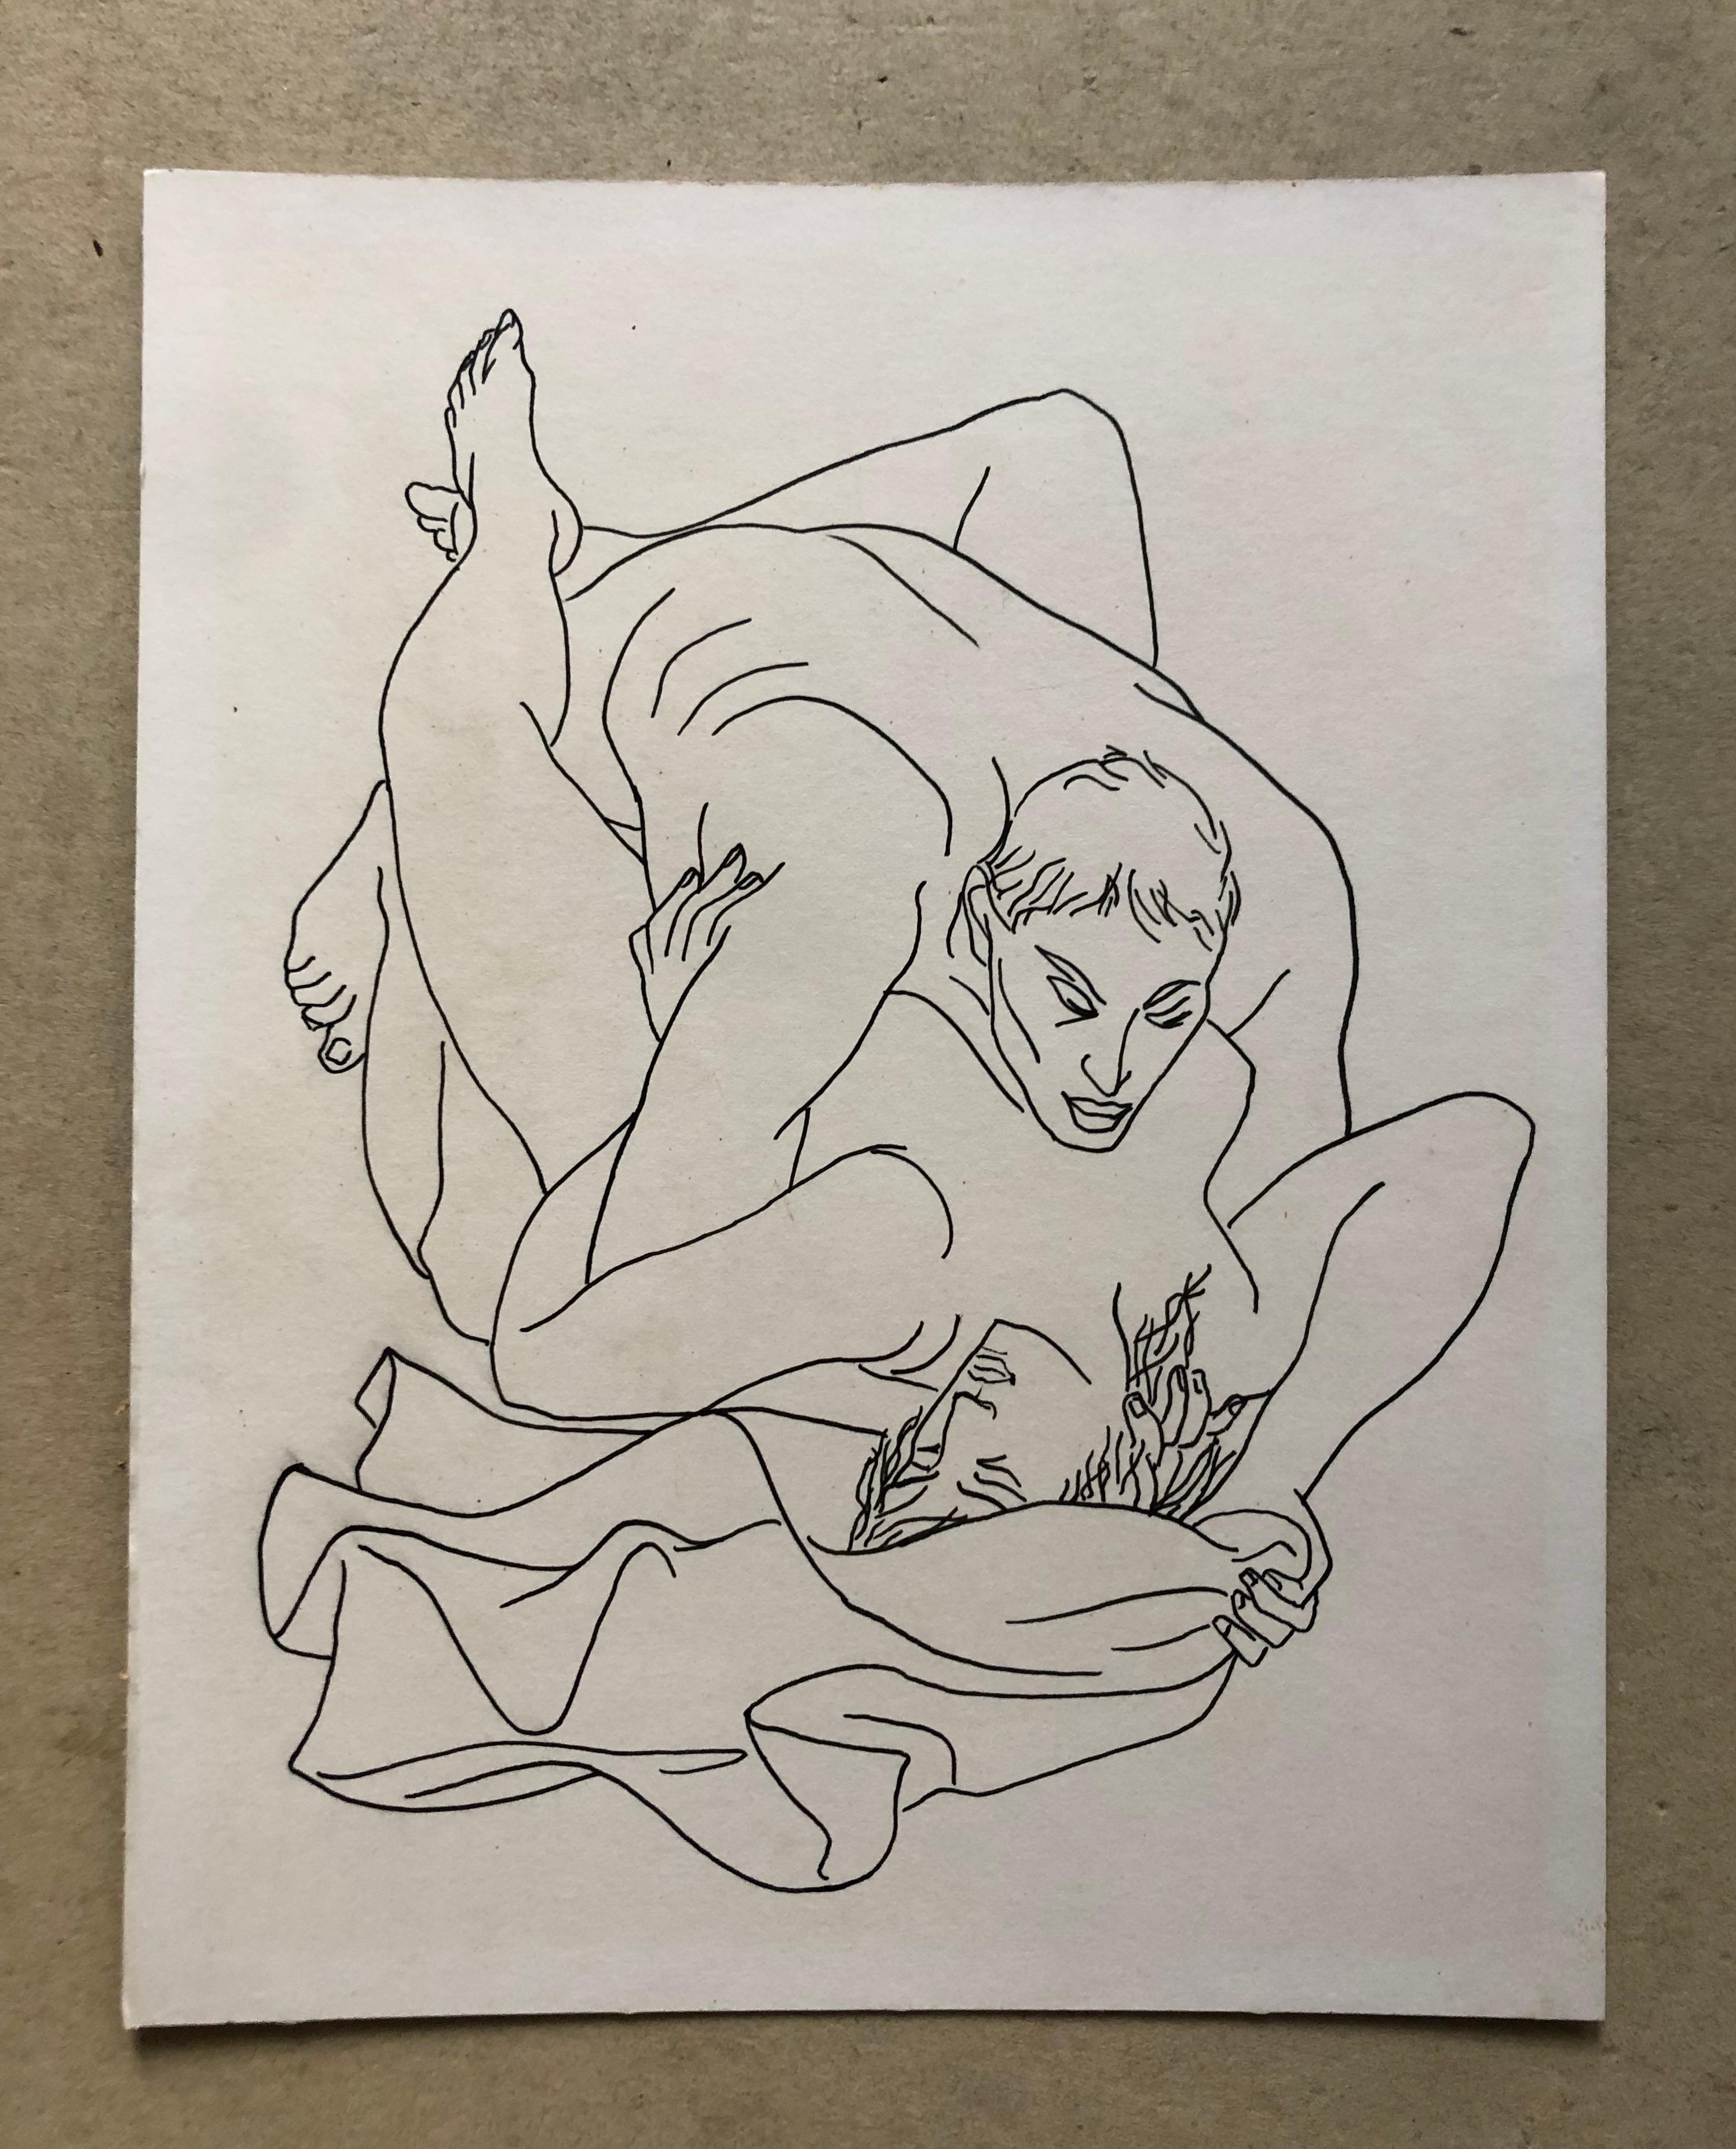 Two Erotic Drawings - Art by Unknown